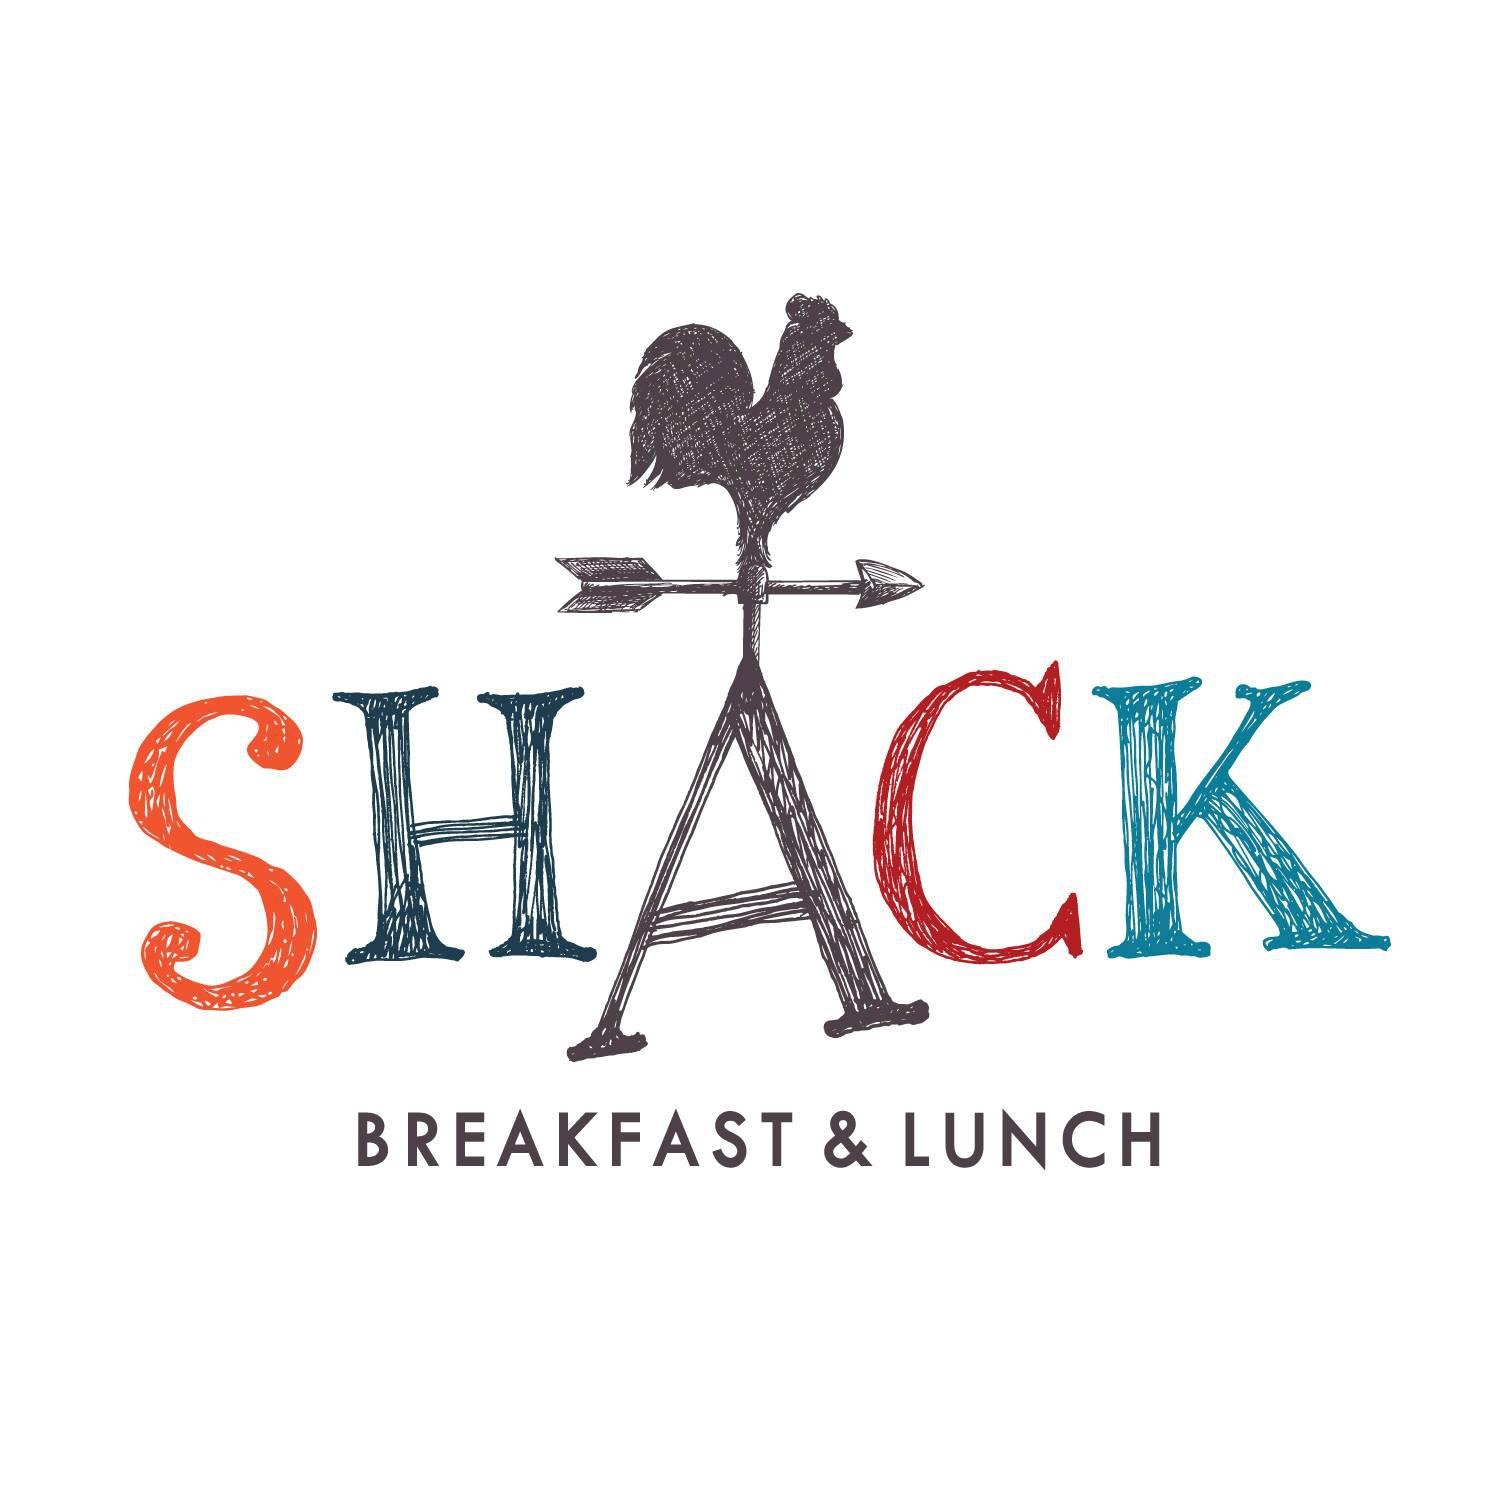 Shack Breakfast & Lunch - Valley Park, MO 63122 - (636)529-1600 | ShowMeLocal.com